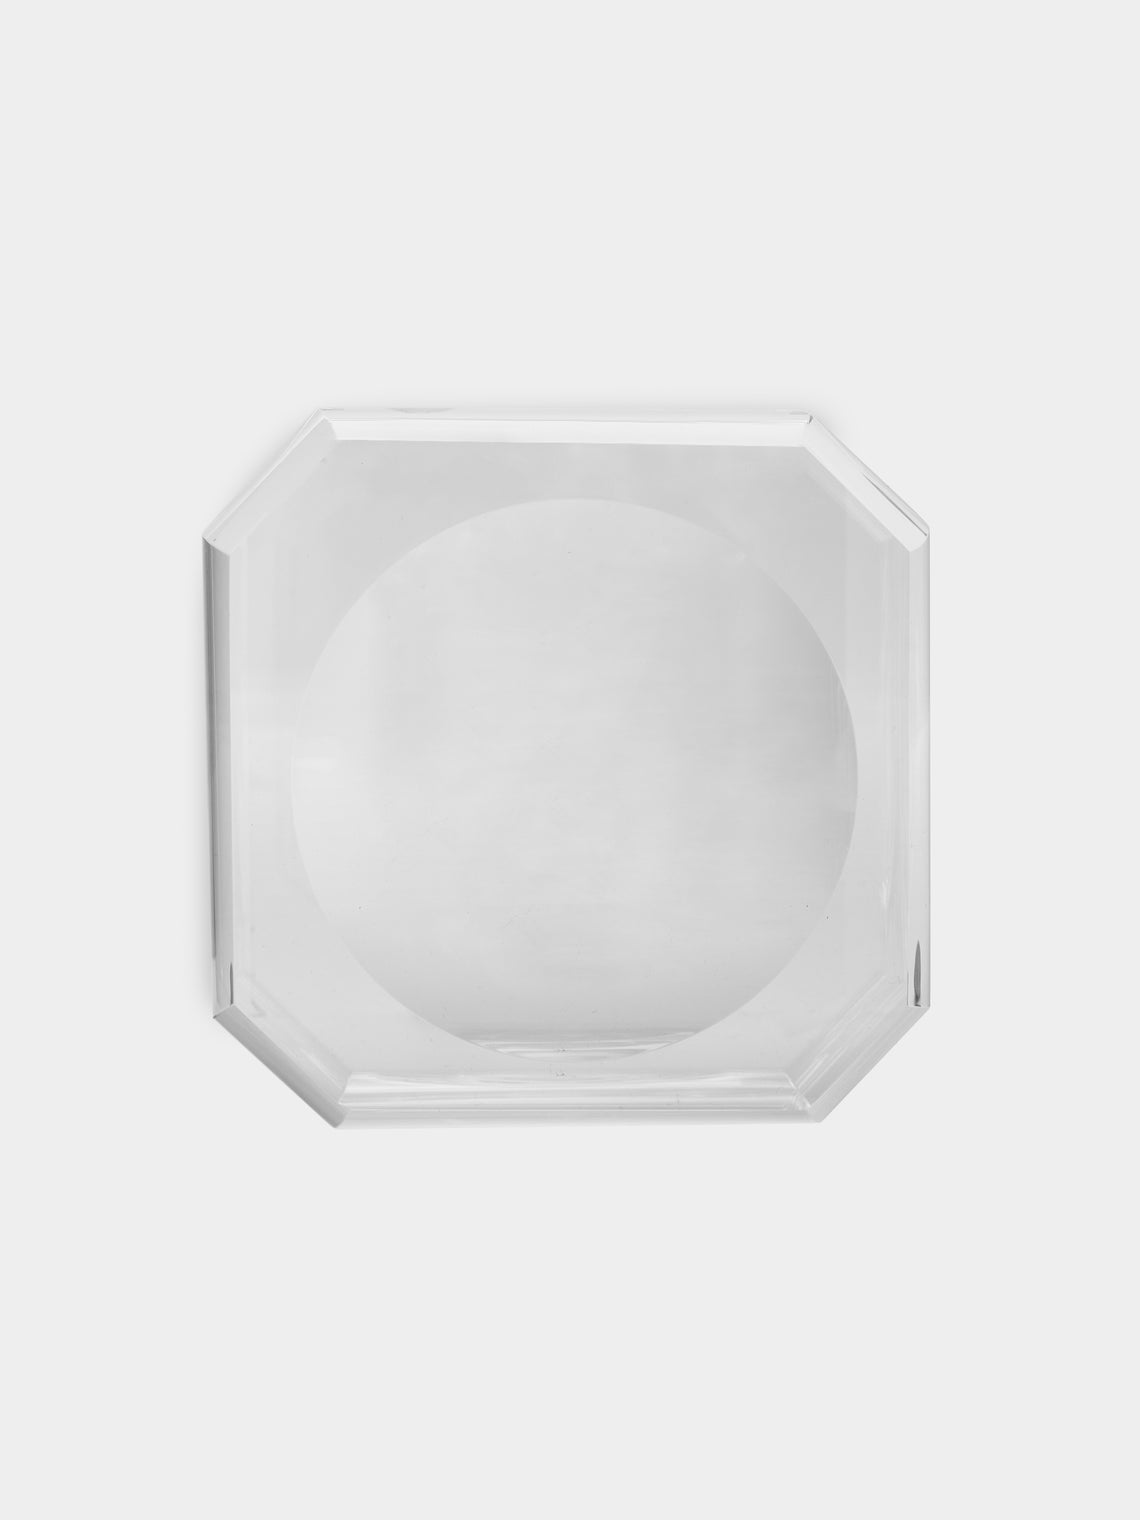 Decor Walther - Cut Crystal Soap Dish -  - ABASK